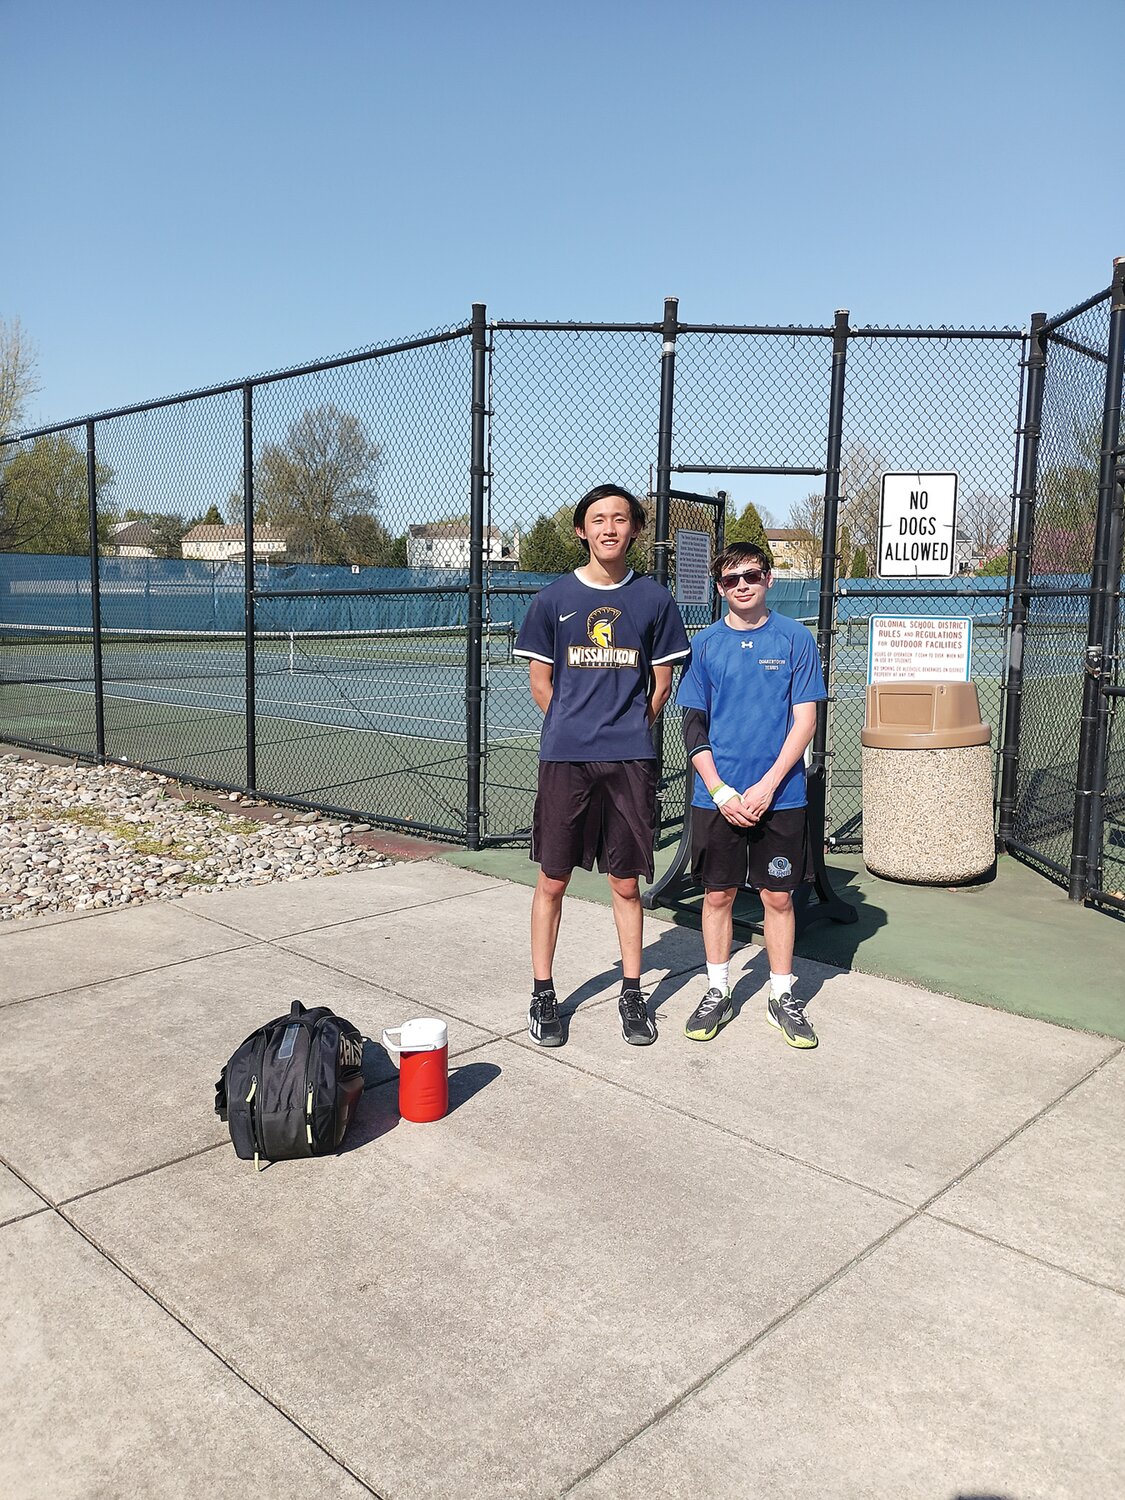 Quakertown’s Max Arkans, right, defeated Wissahickon’s Andy Wang 6-0, 6-2 to capture his first Suburban One League Liberty crown and become the first Quakertown tennis player to win an SOL title.